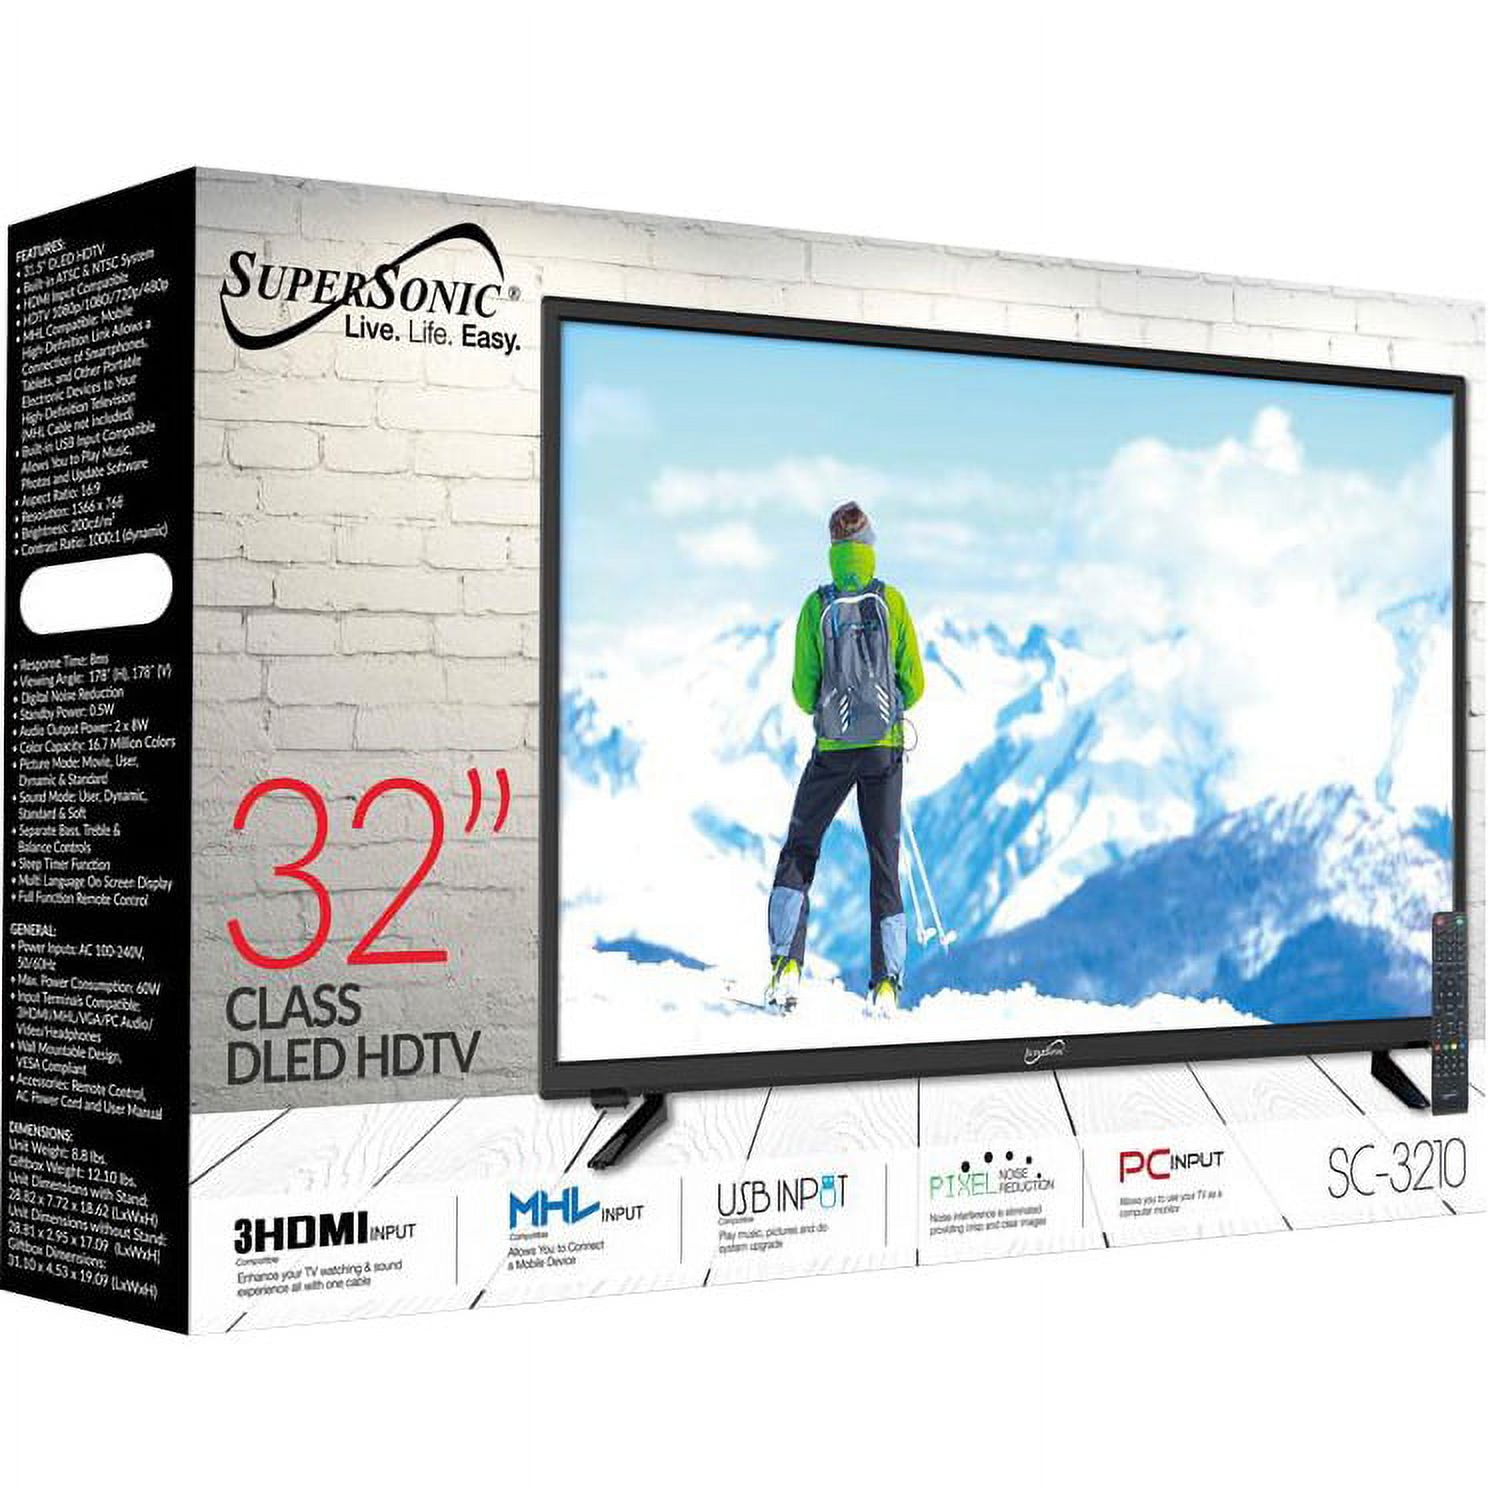 Supersonic 32" Class LED 1366 x 768 Widescreen HDTV - image 2 of 4